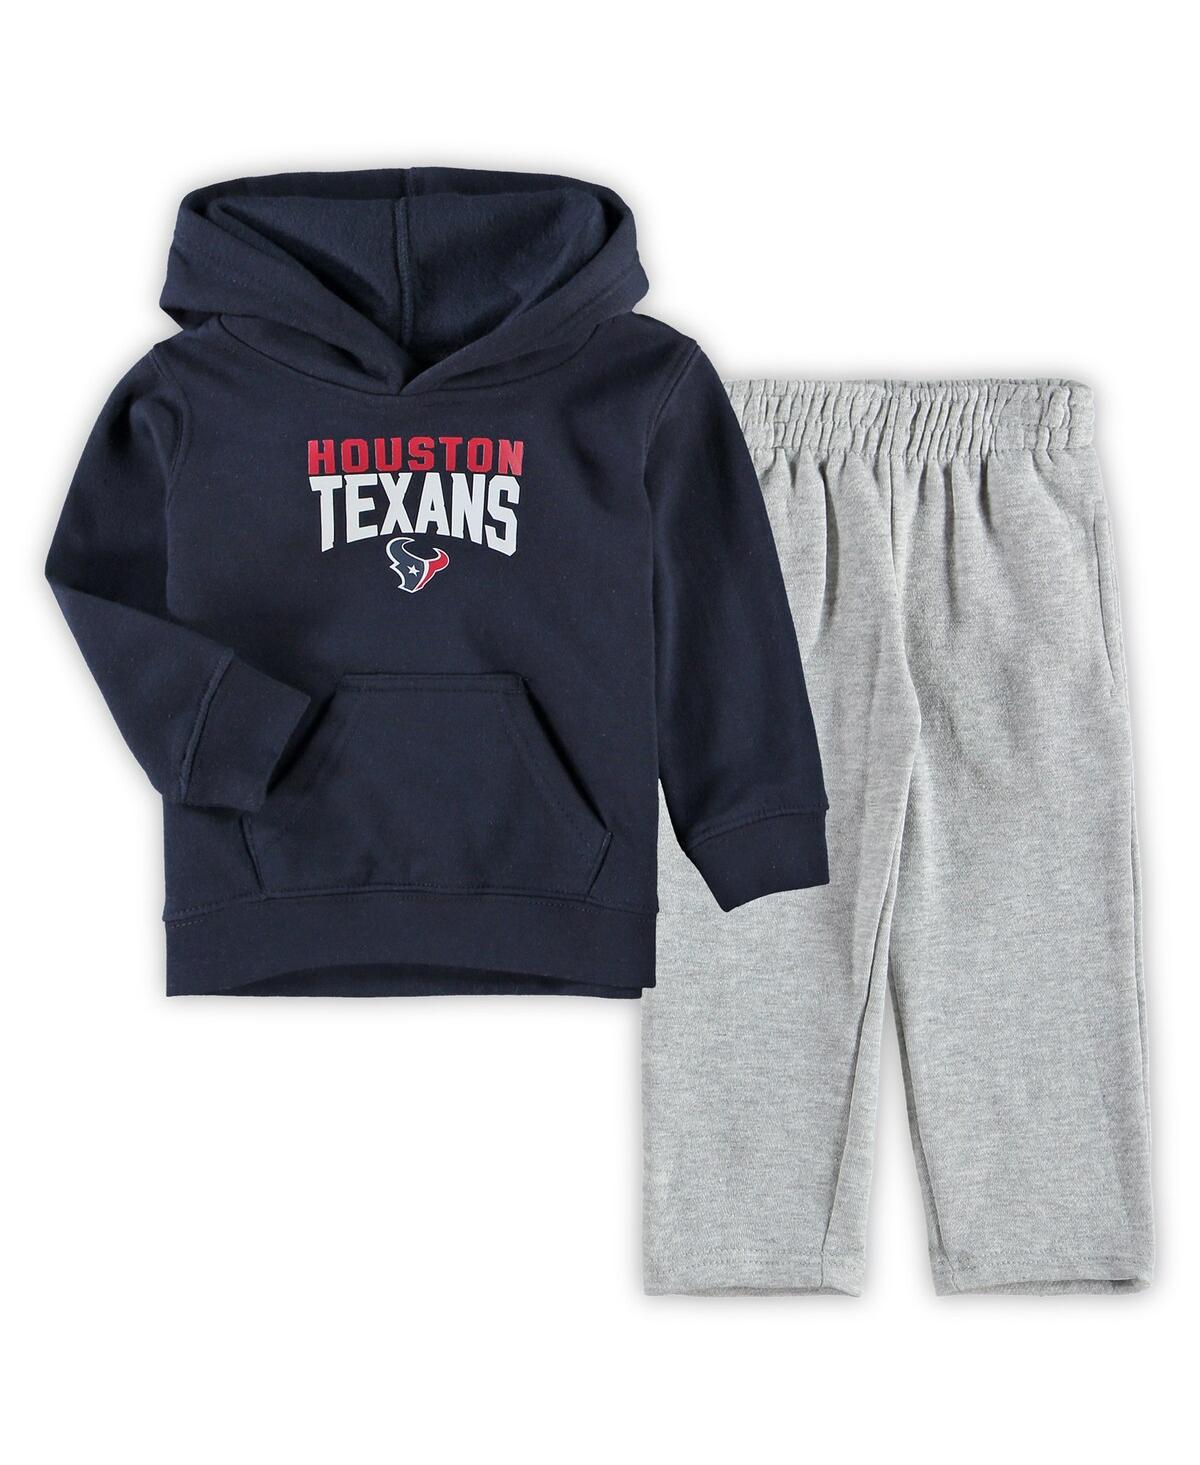 Outerstuff Babies' Toddler Boys Navy, Heathered Gray Houston Texans Fan Flare Pullover Hoodie And Sweatpants Set In Navy,heathered Gray